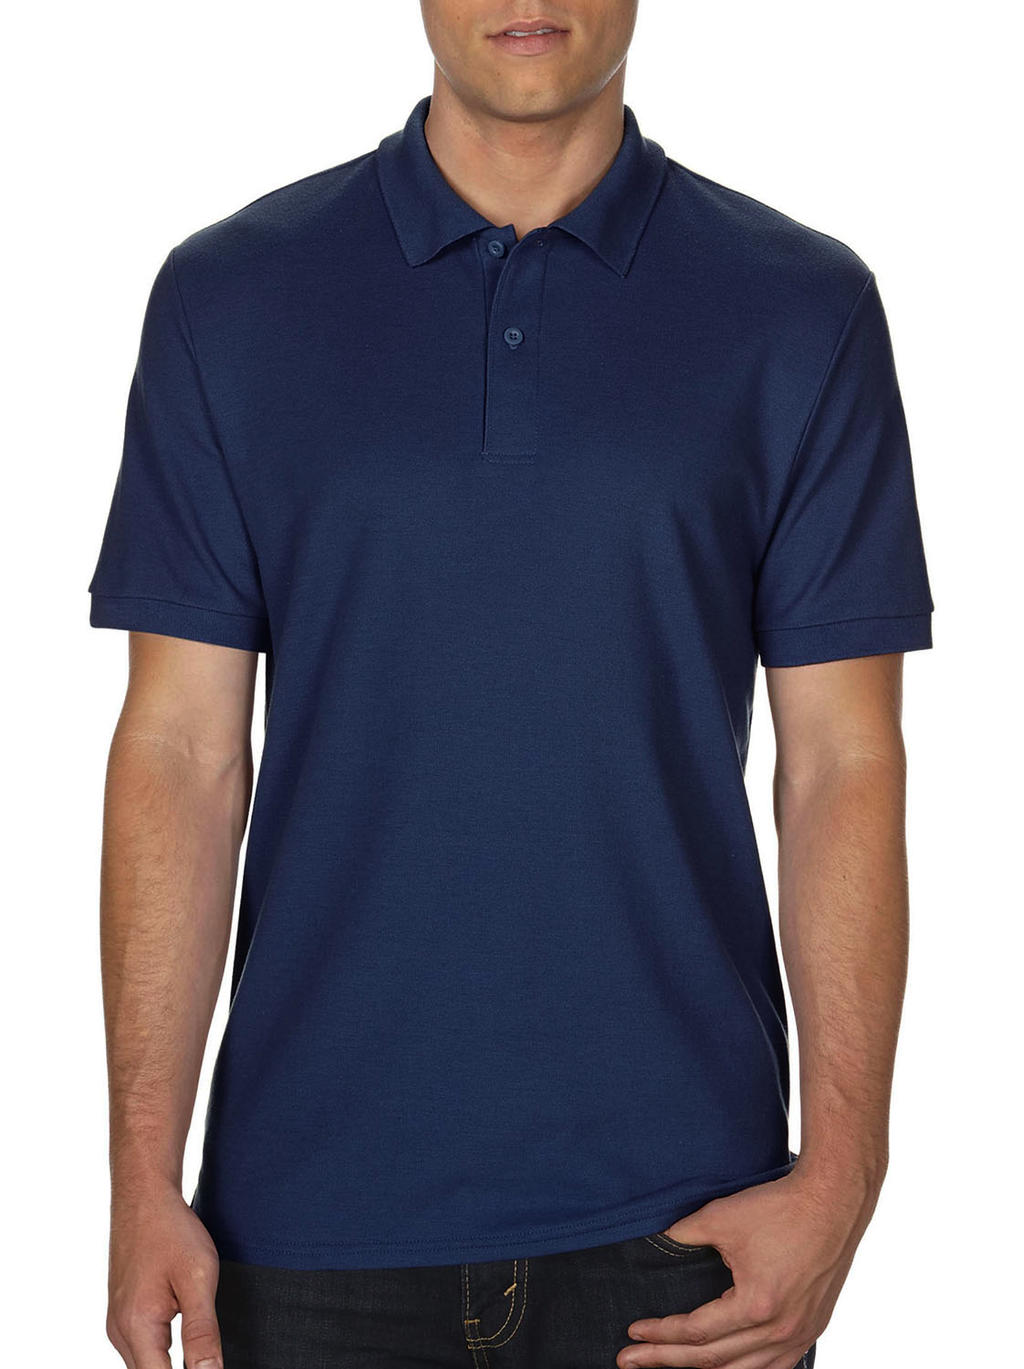  DryBlend? Double Piqu? Polo in Farbe Navy